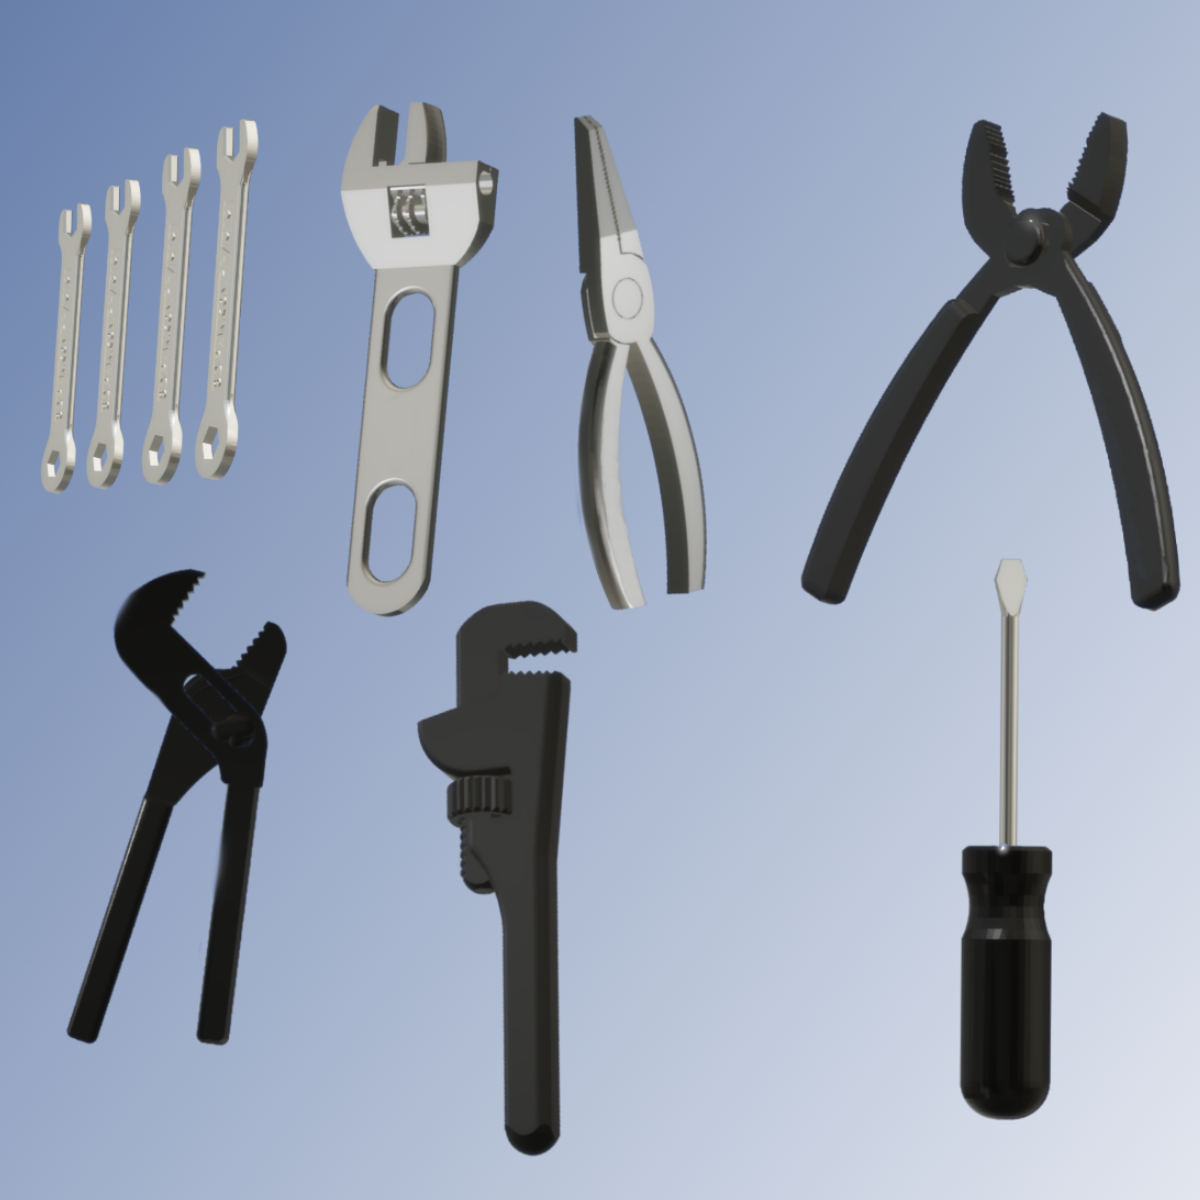 current products - 3d printed hardware tool set including Adjustable Wrench, Pliers, Pipe Wrench, Channel Locks, Standard and Metric Wrench sets